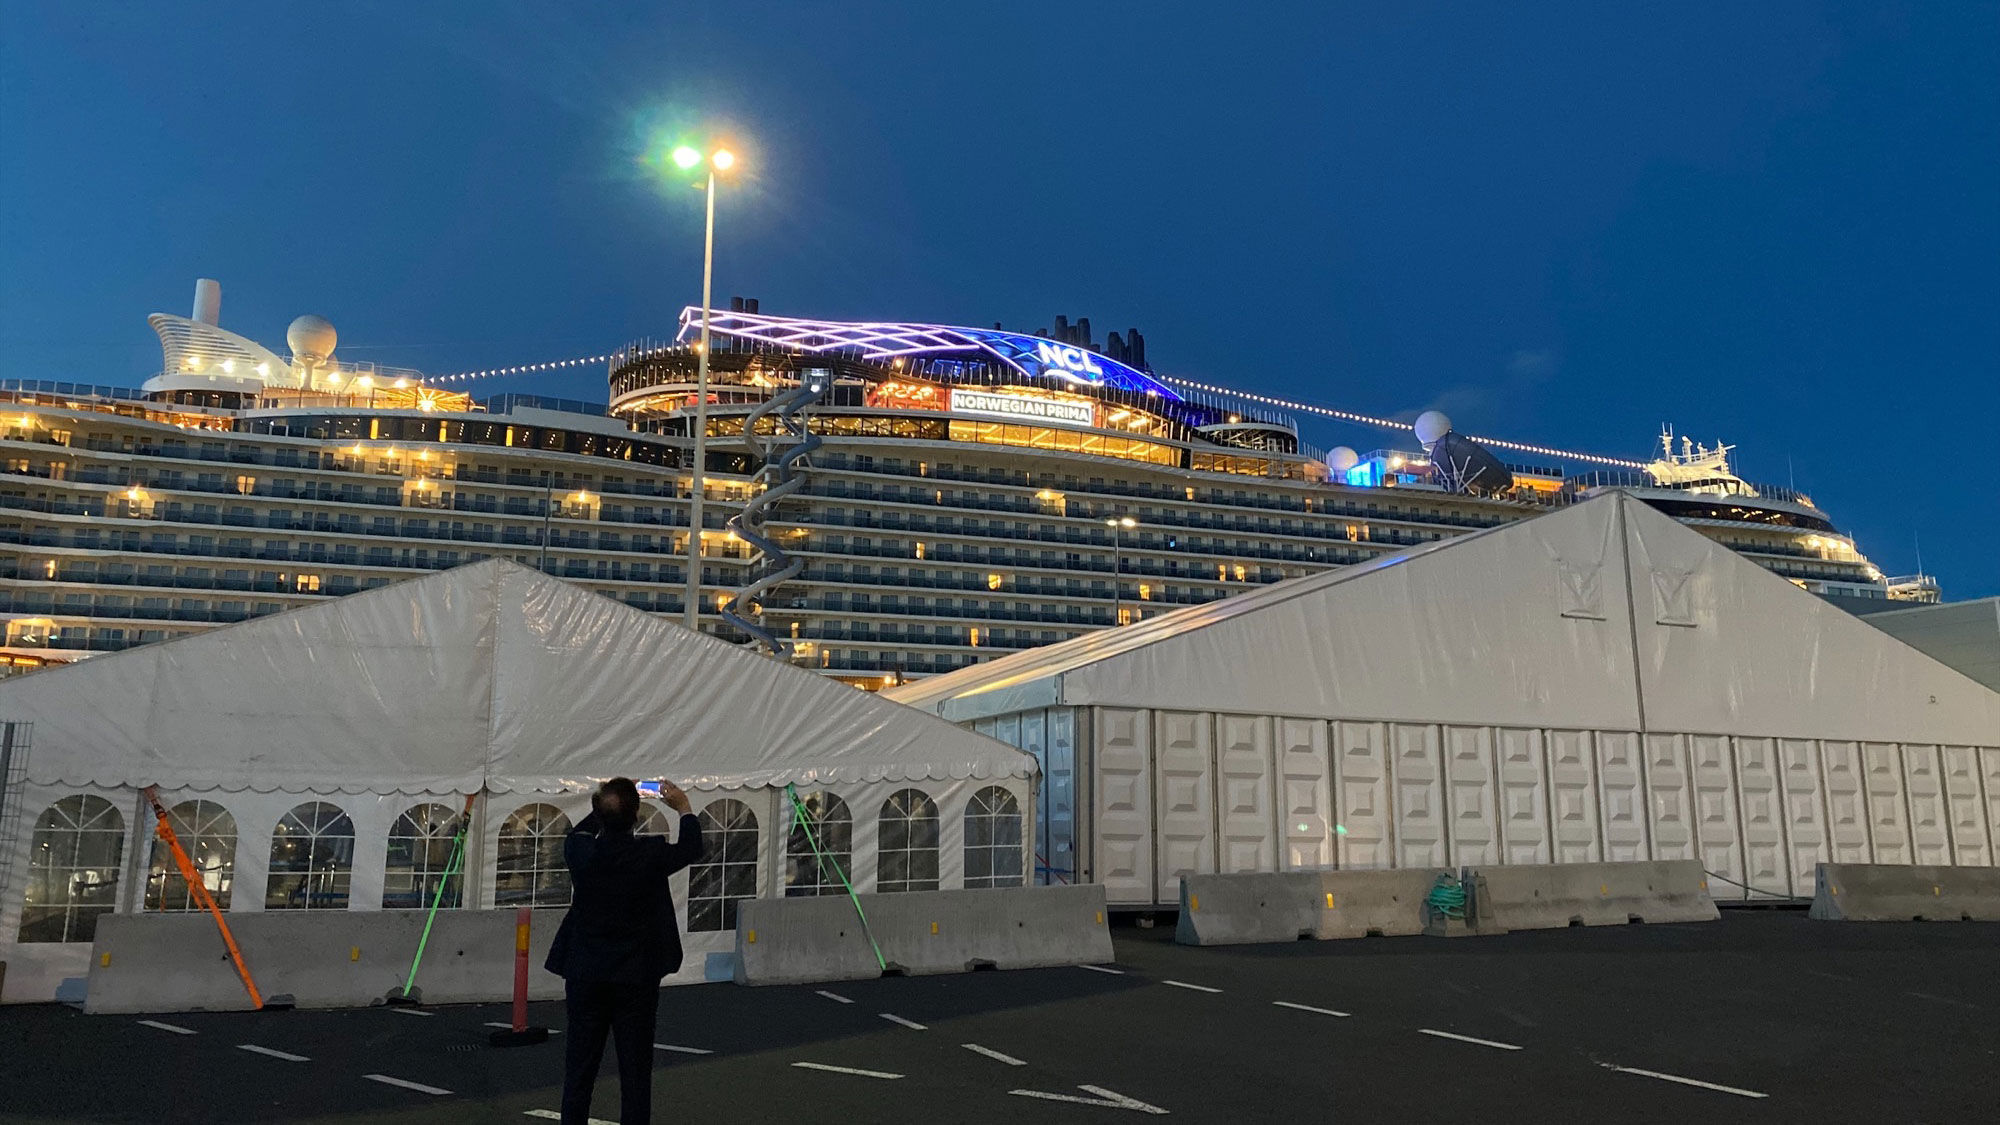 The Norwegian Prima sailed its inaugural voyage out of Reykjavik, Iceland, on Aug. 27.